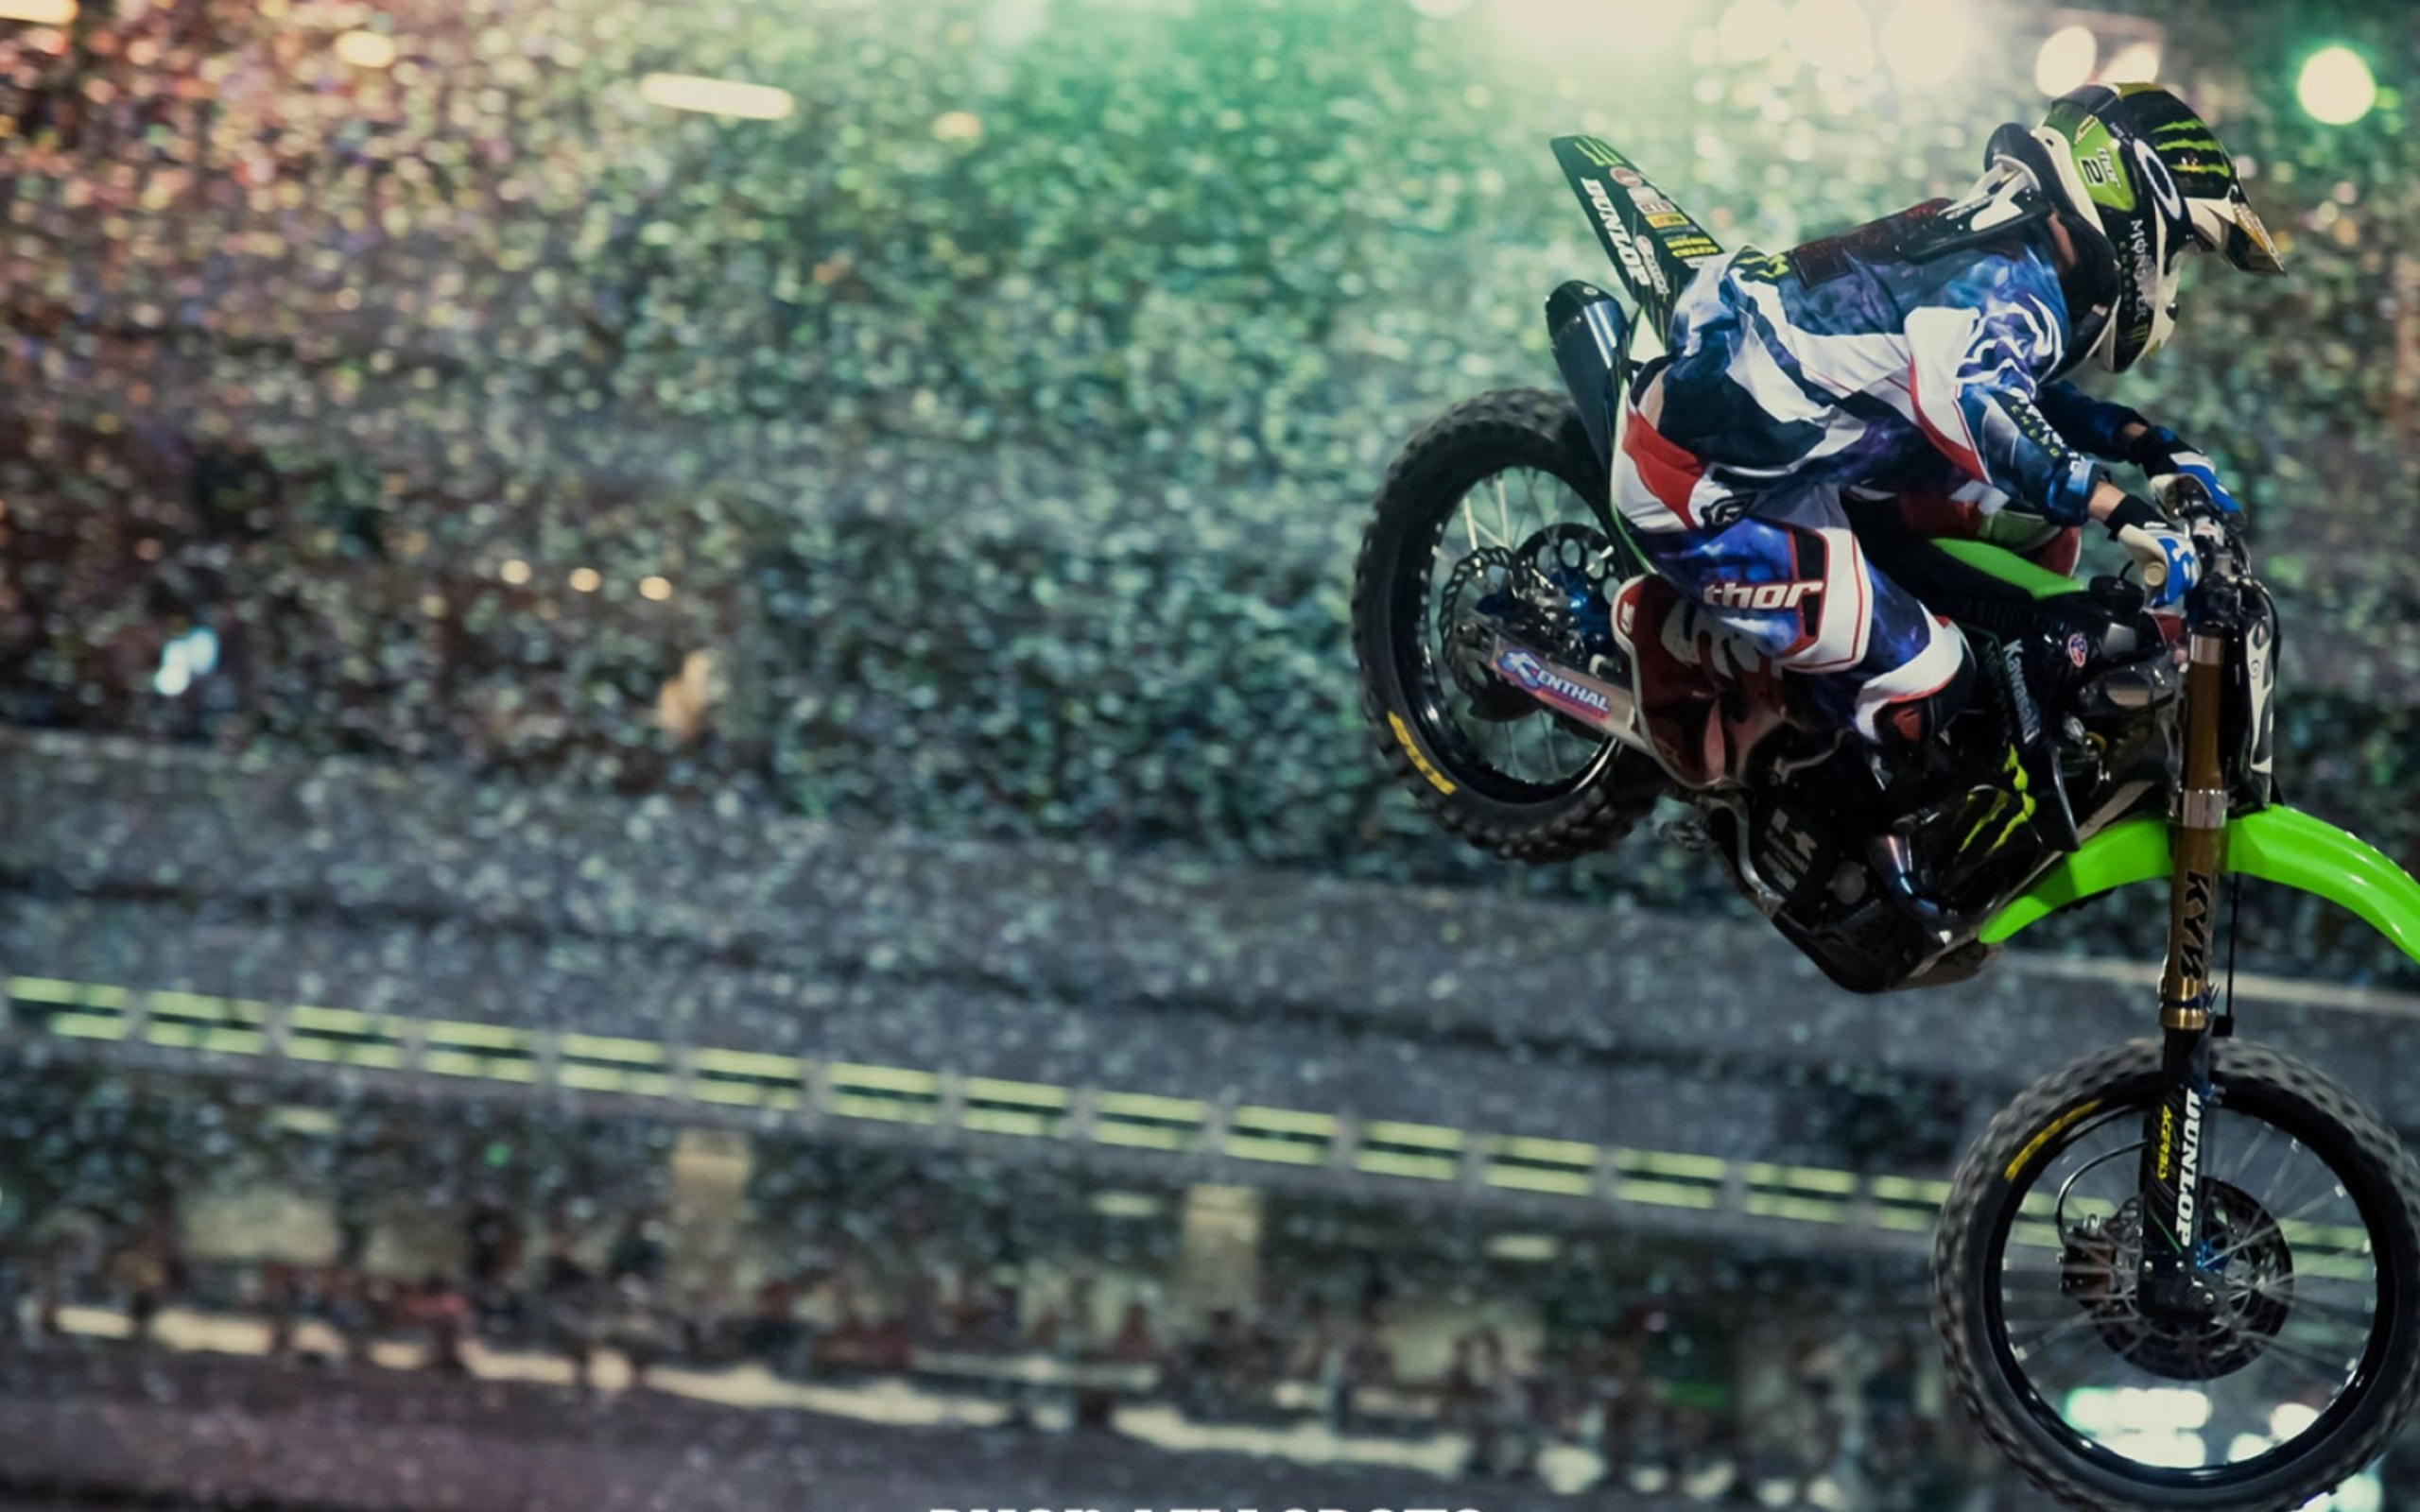 Stunt: Red Bull motorcycle stunt riding competition, X Fighters 2017. 2560x1600 HD Background.